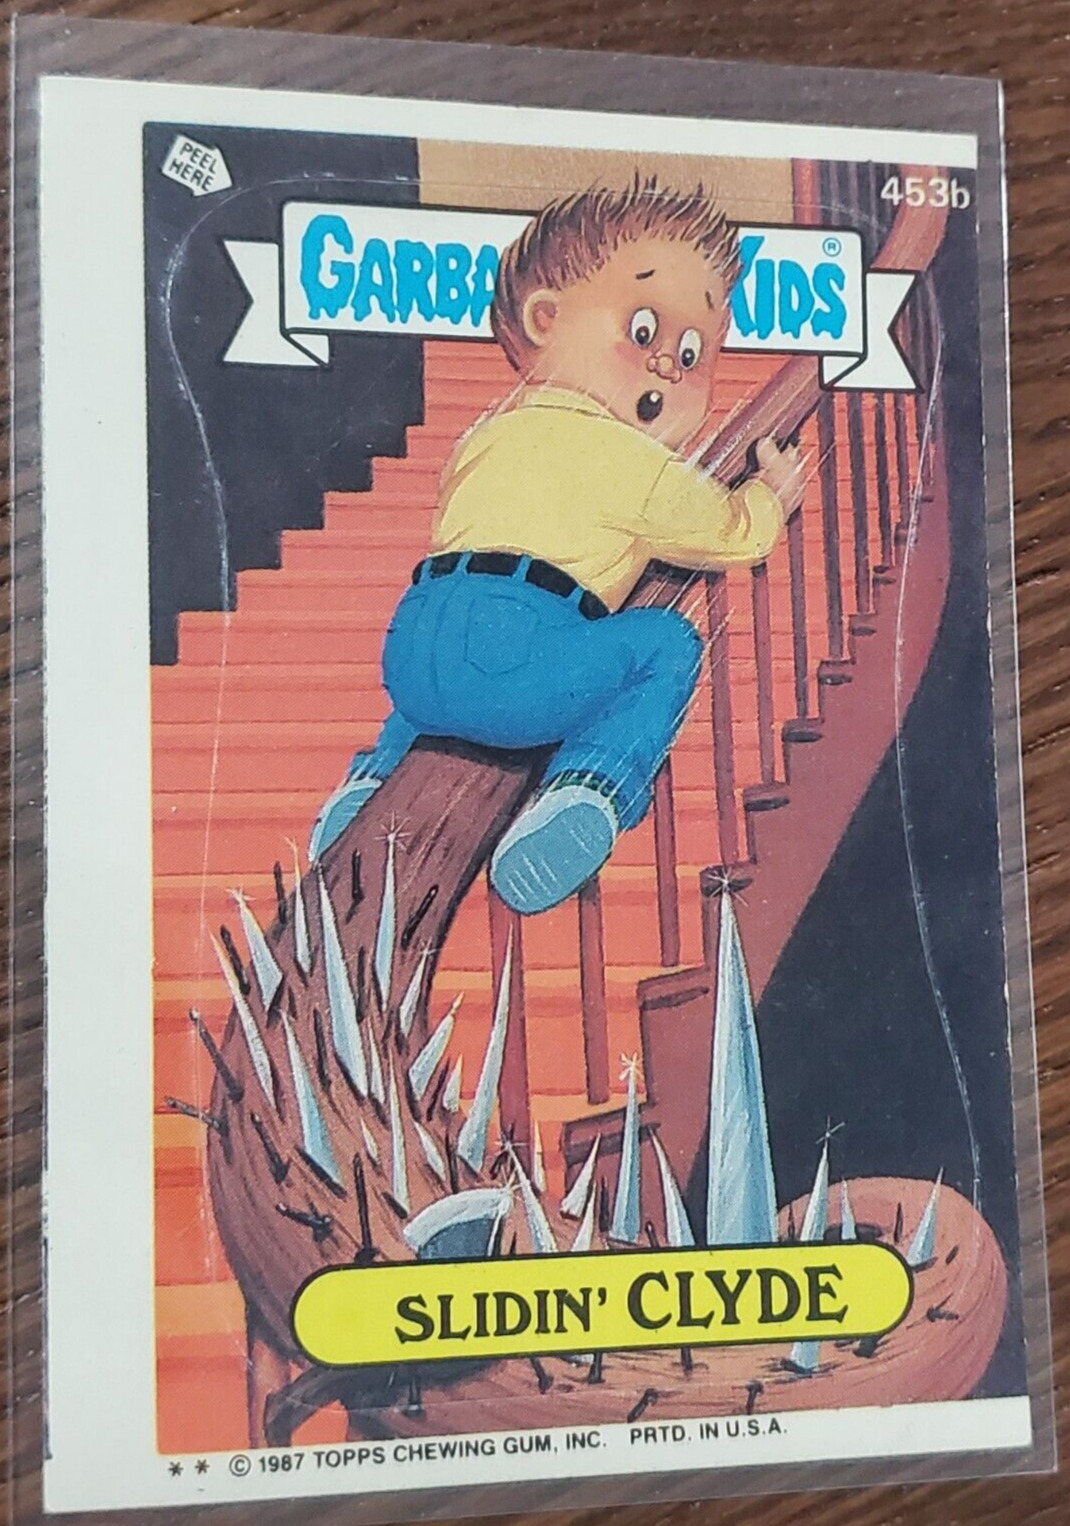 1987 Topps Garbage Pail Kids 11th Series MISCUT Slidin' Clyde 453b